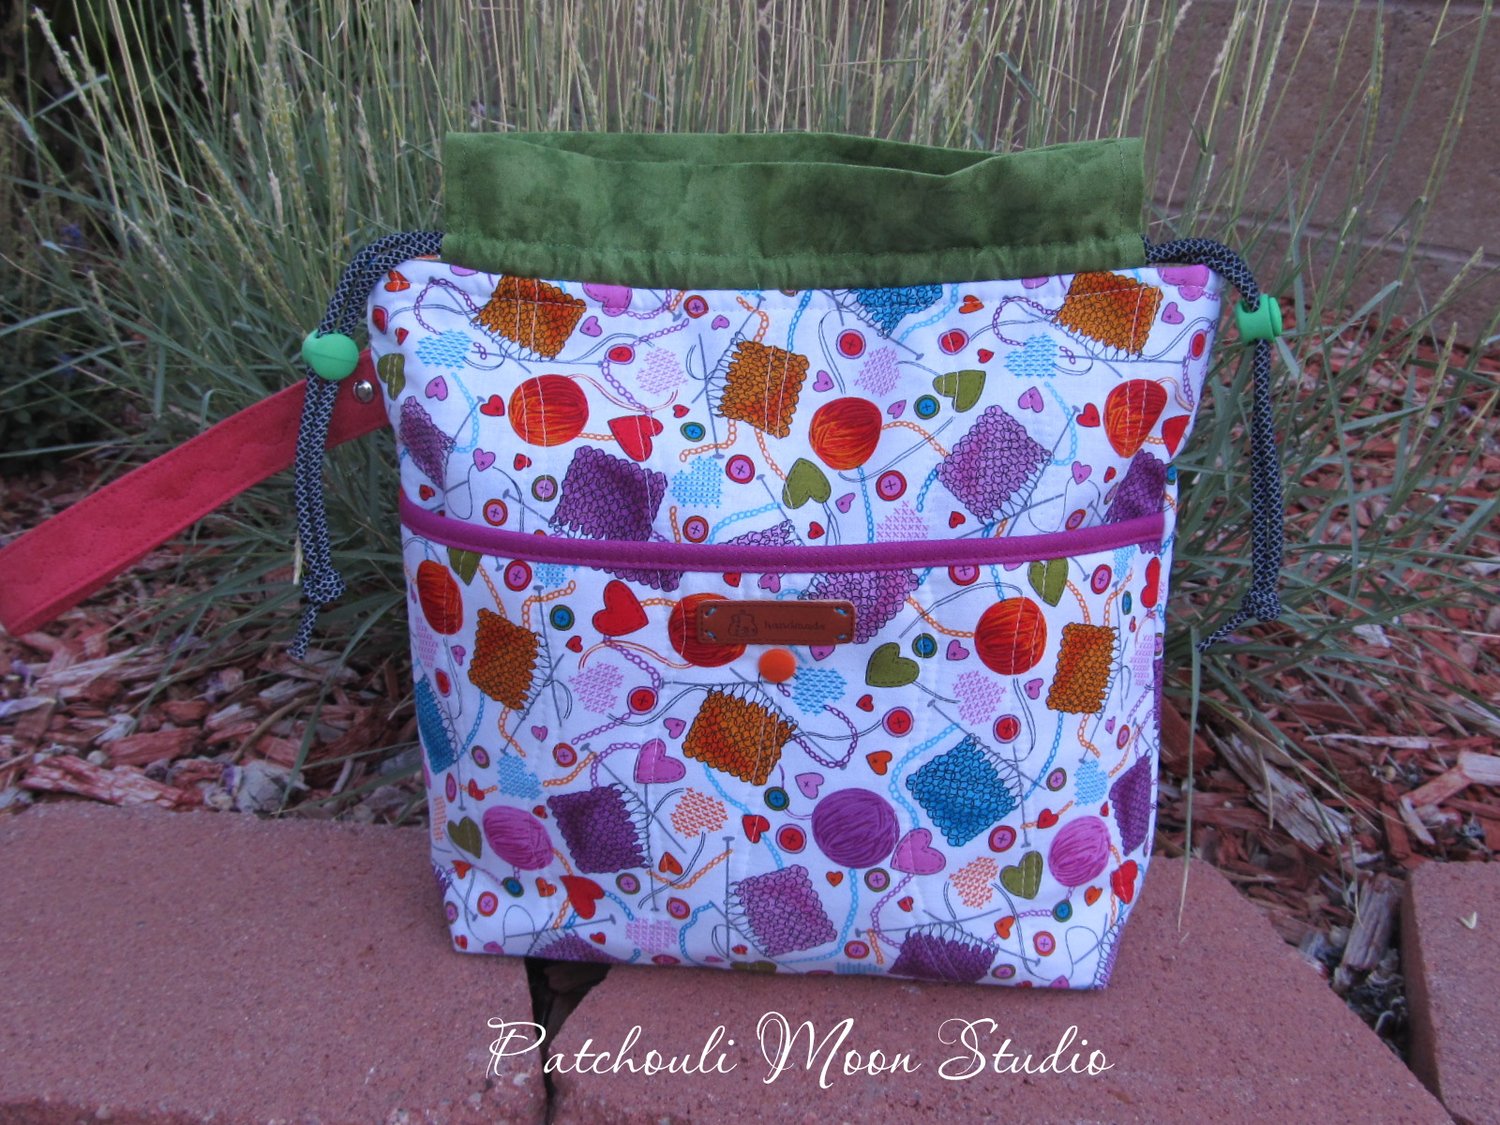 Patchouli Moon Studio: Drawstring Project Bags in 2 Sizes